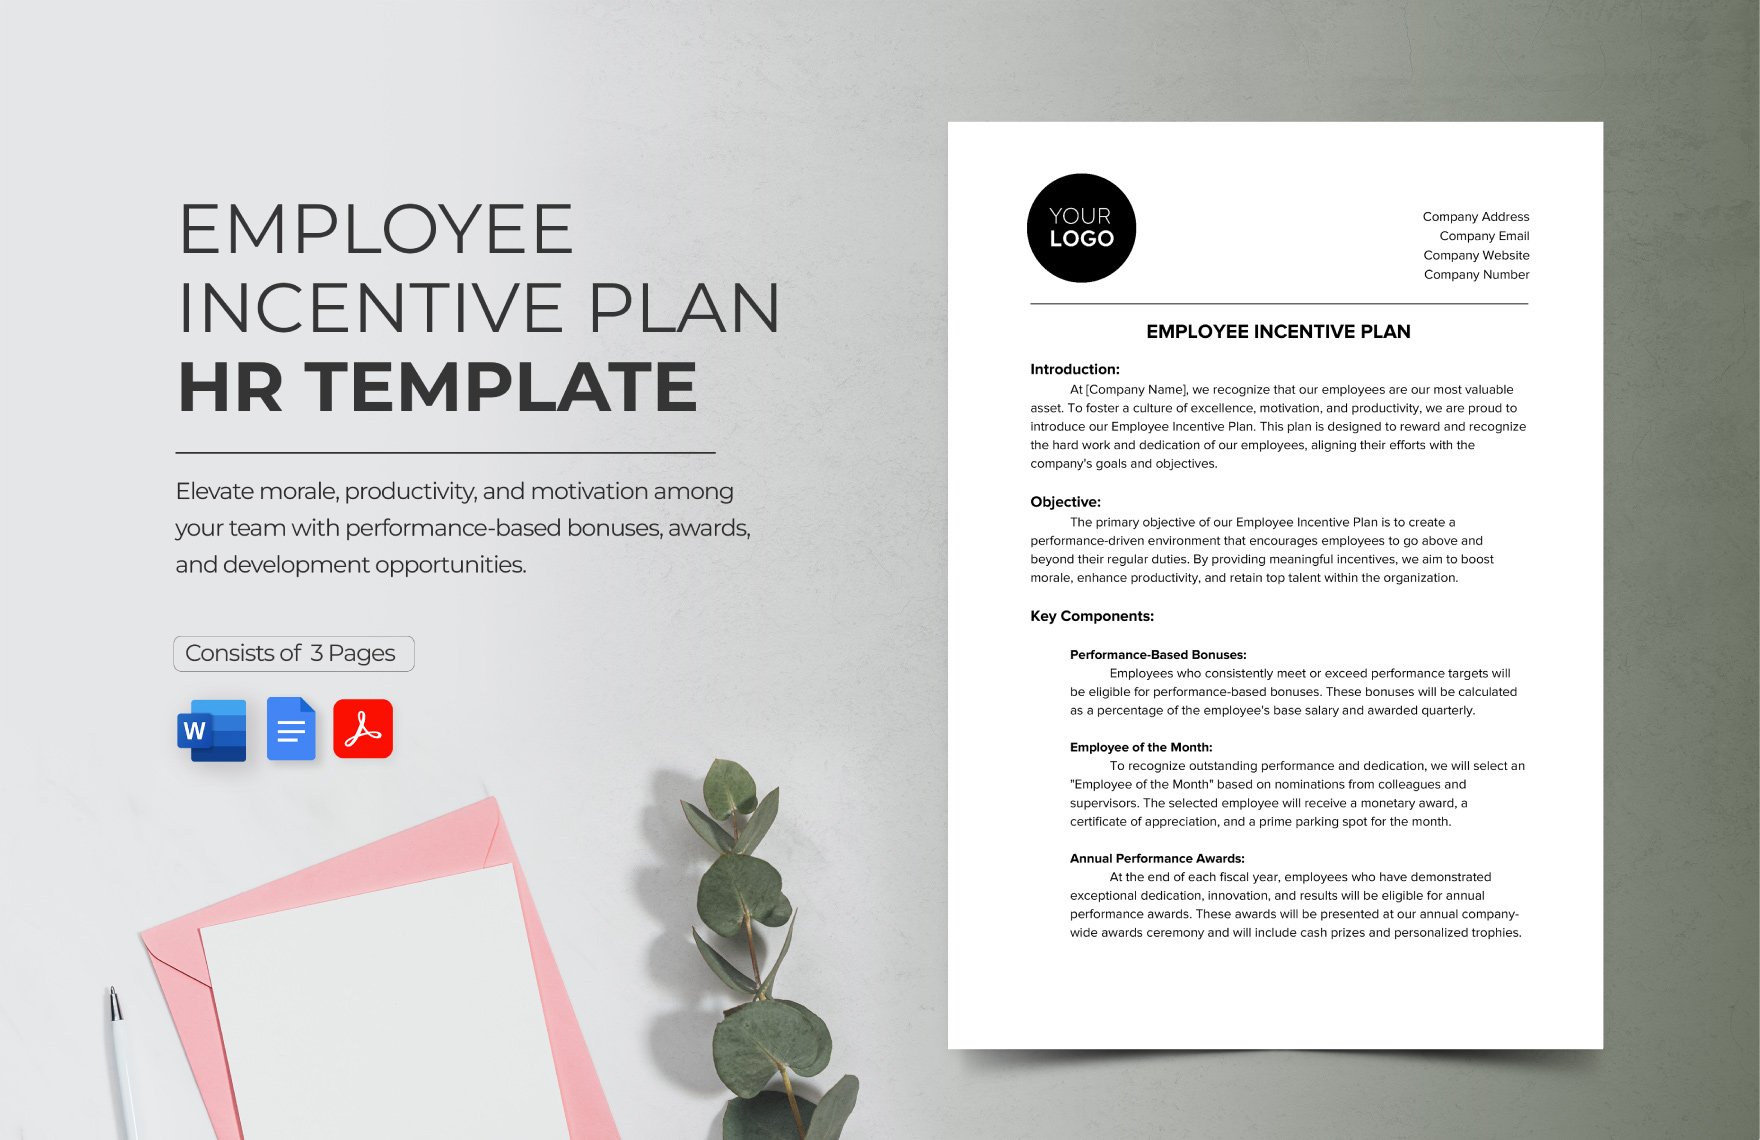 Employee Incentive Plan HR Template in Word, Google Docs, PDF